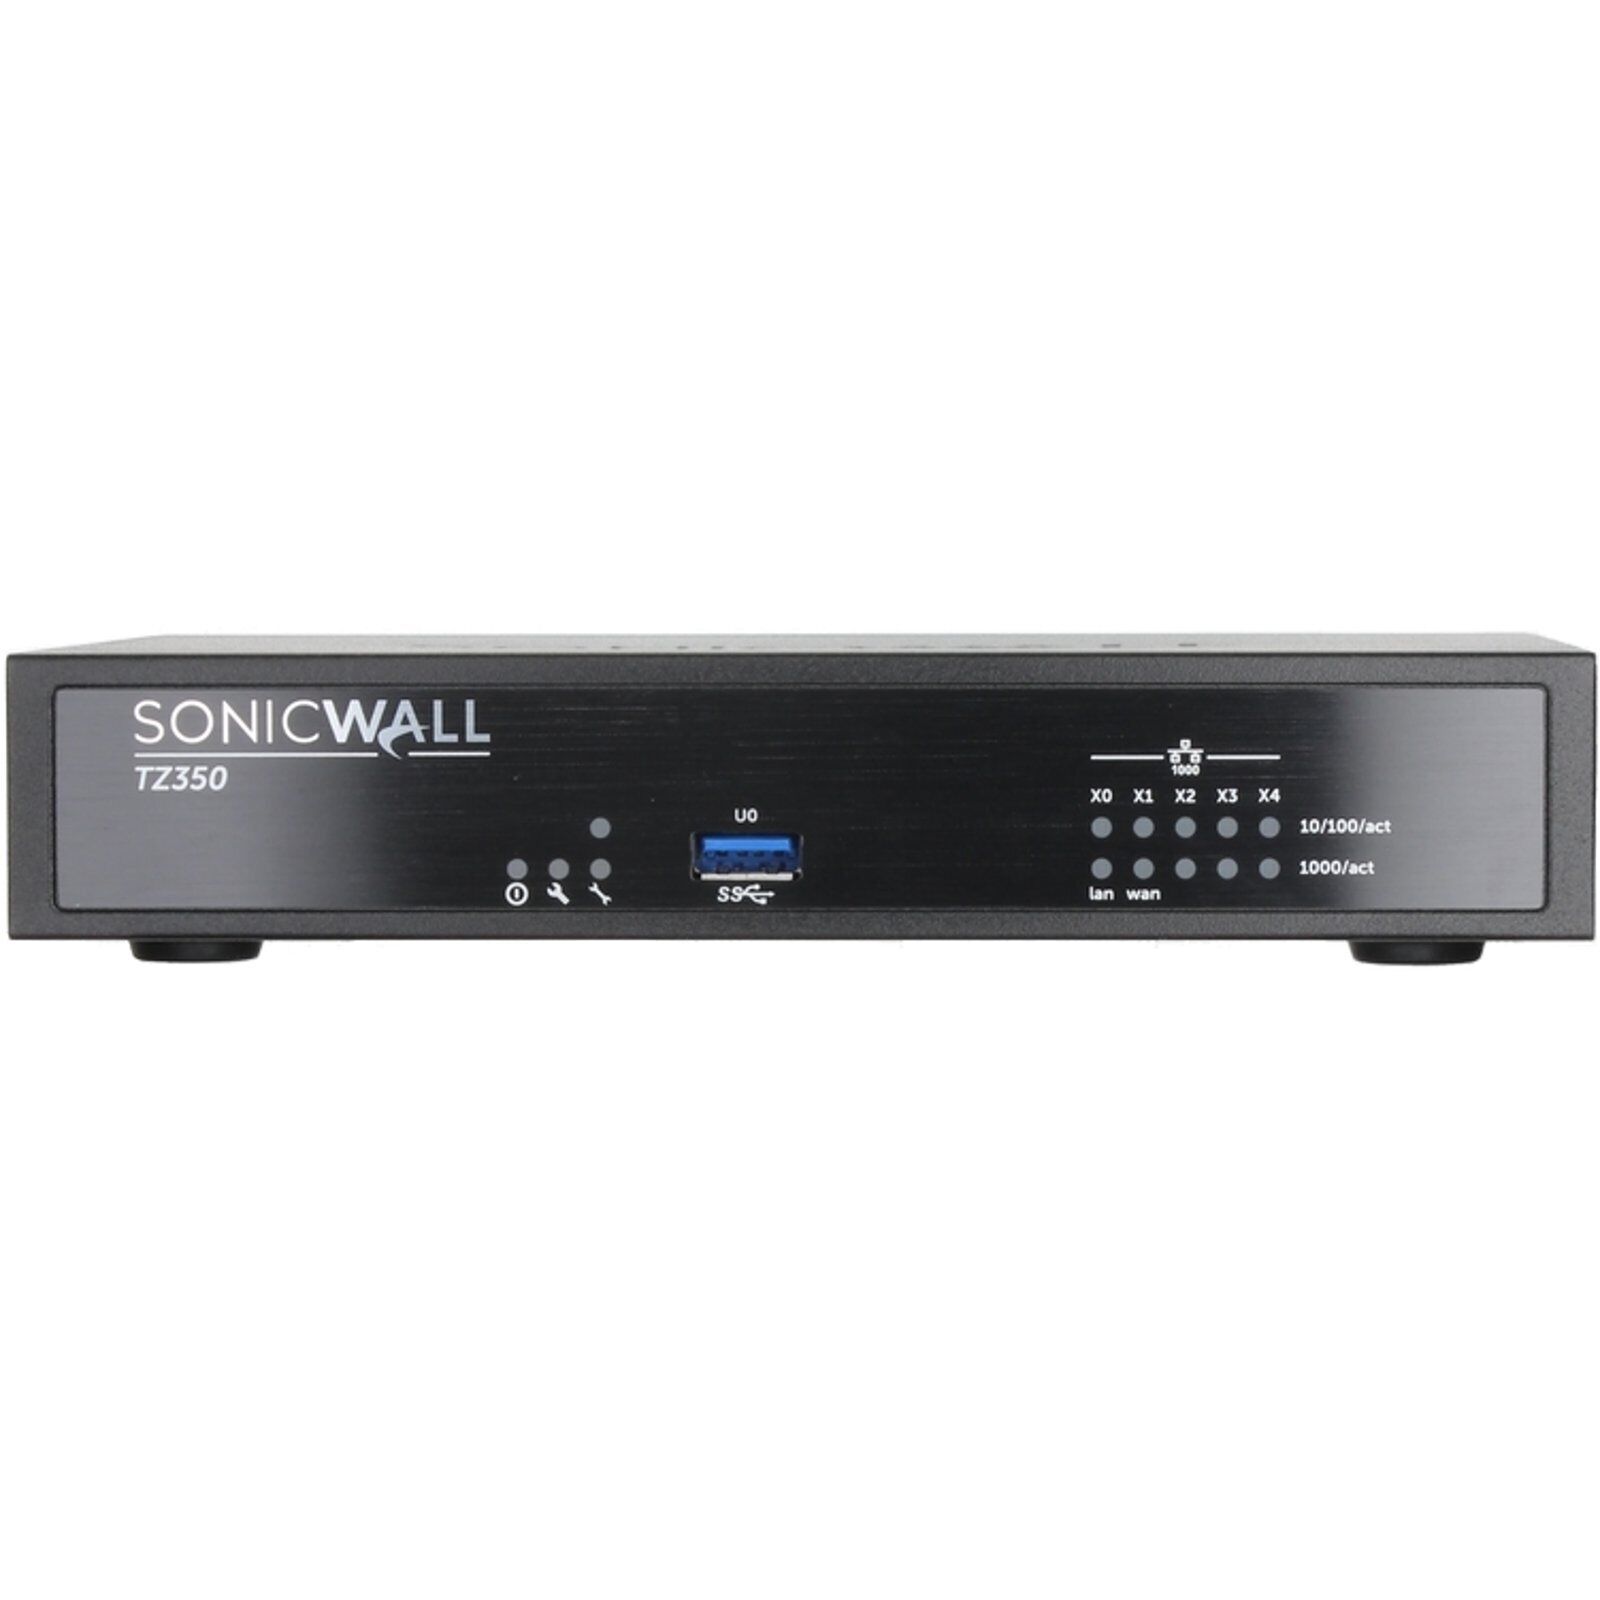 SonicWall TZ350 5P 1GbE Security Appliance